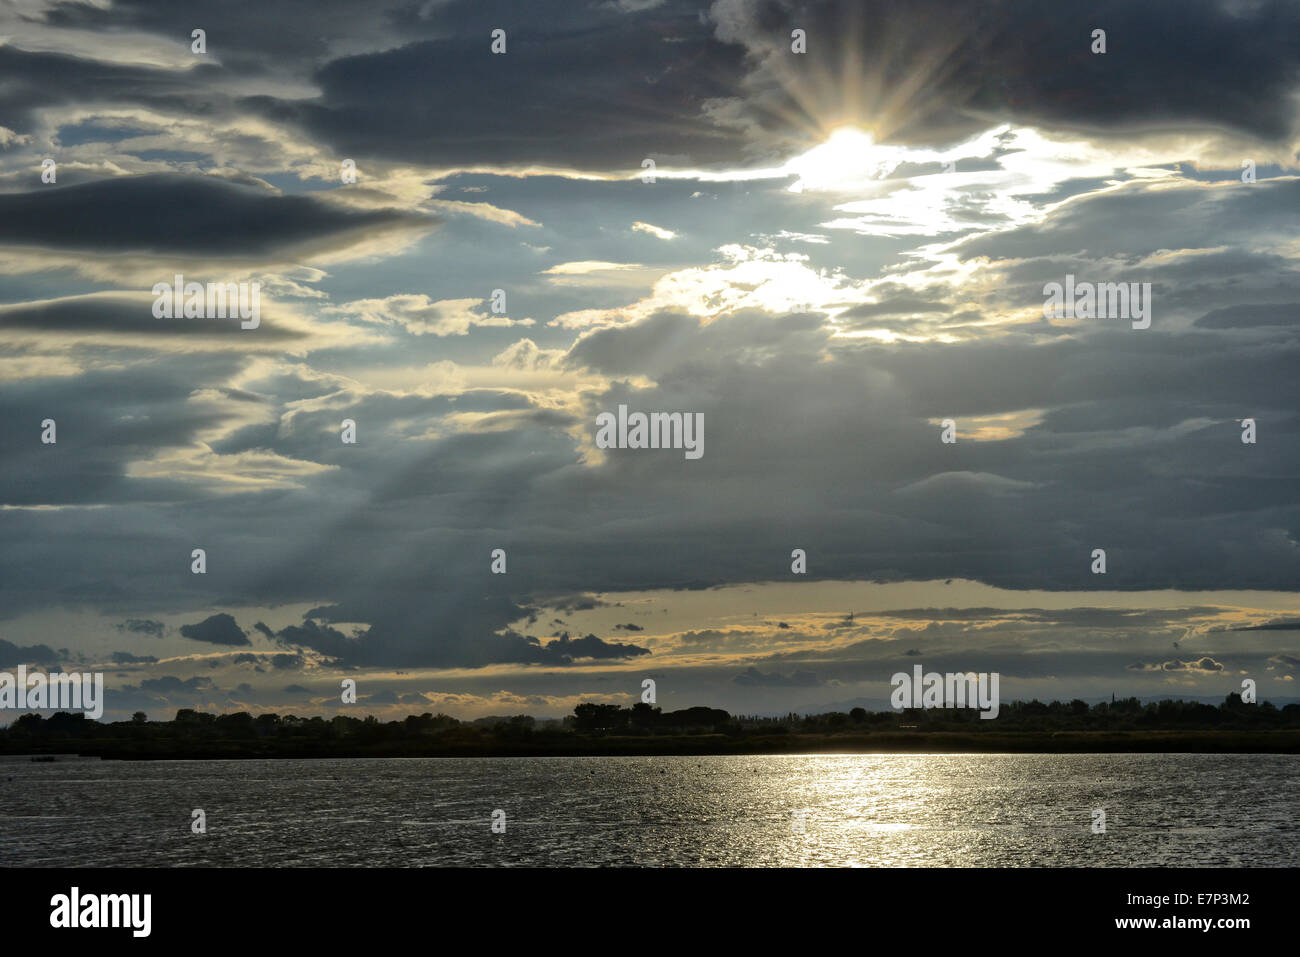 Europe, France, Languedoc- Roussillon, Camargue, sunset, sun, silhouettes, stormy, wetland Stock Photo